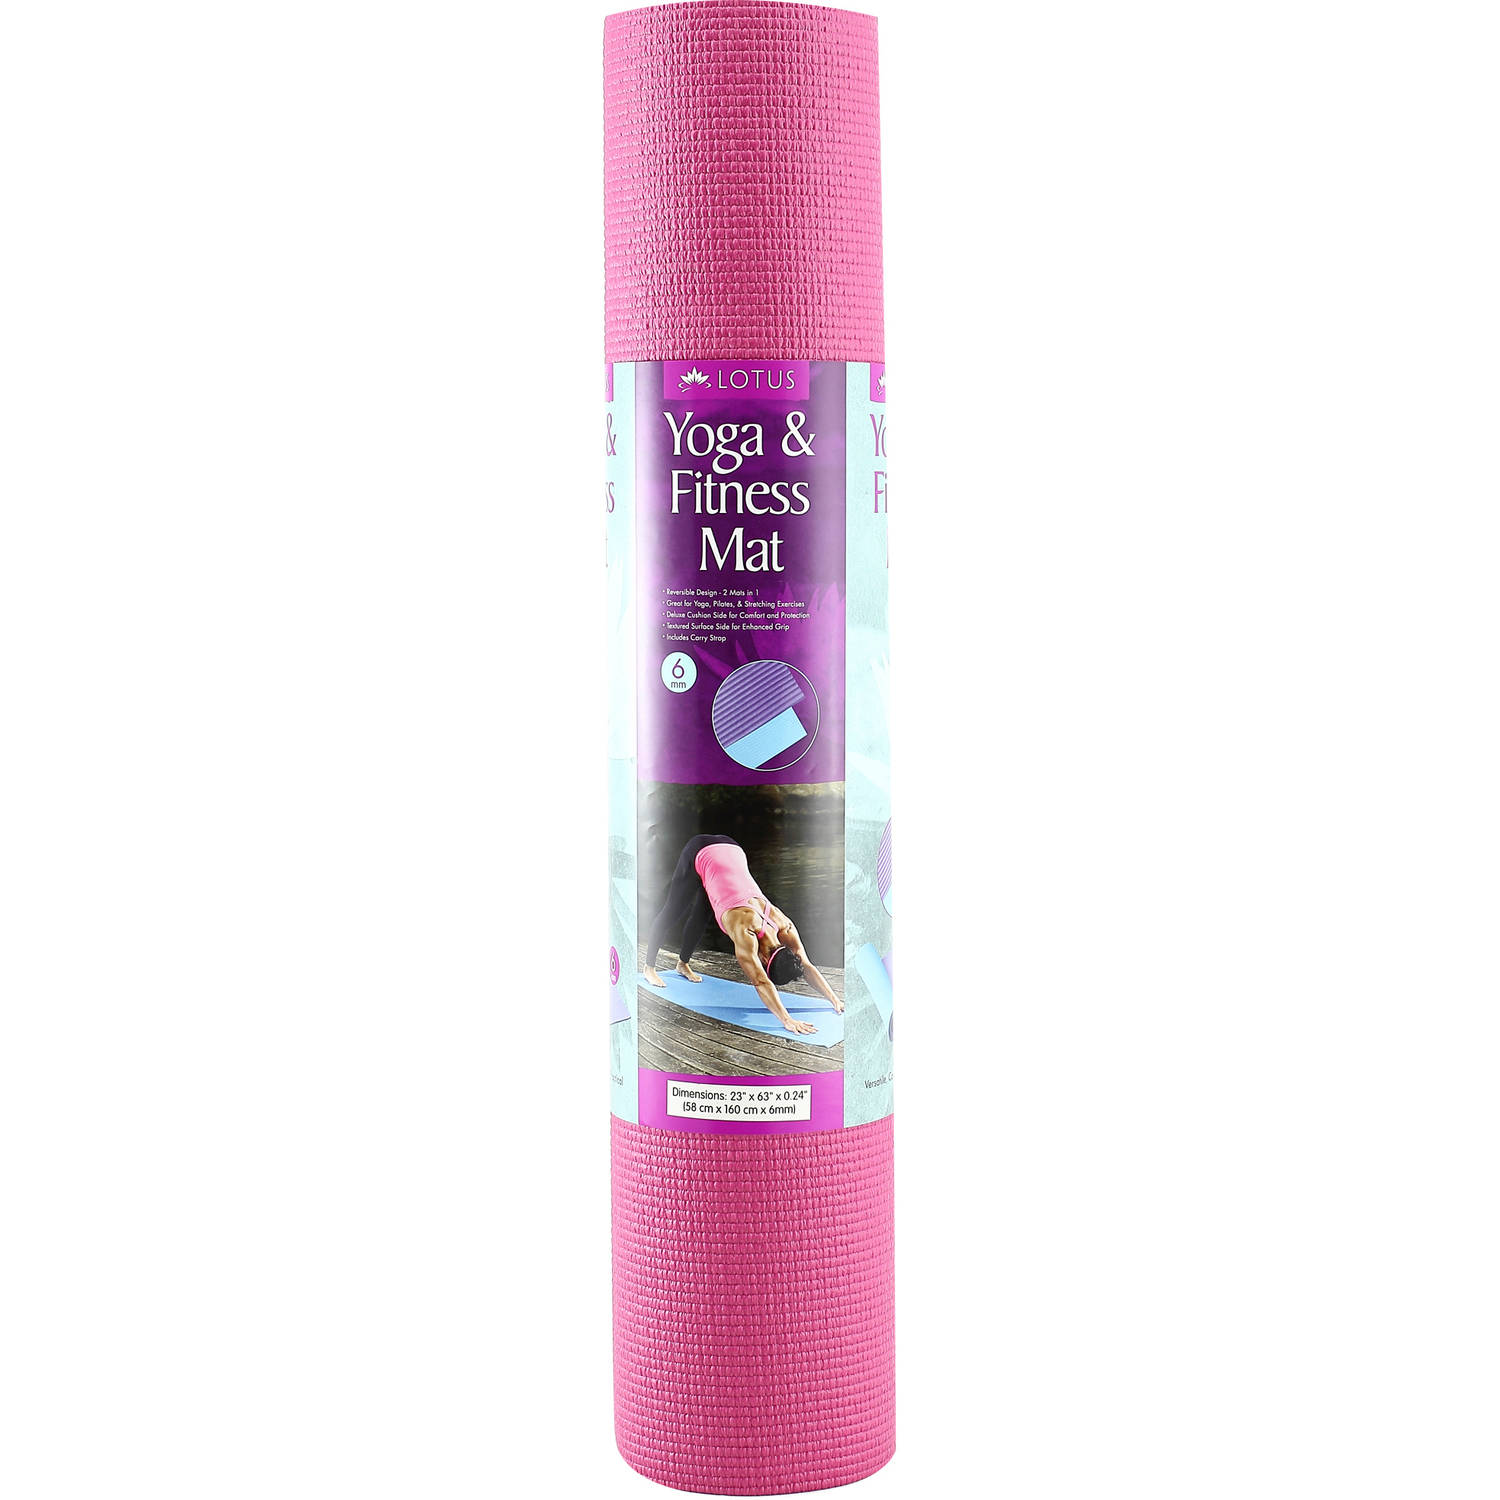 Lotus Yoga And Fitness Mat - image 1 of 3